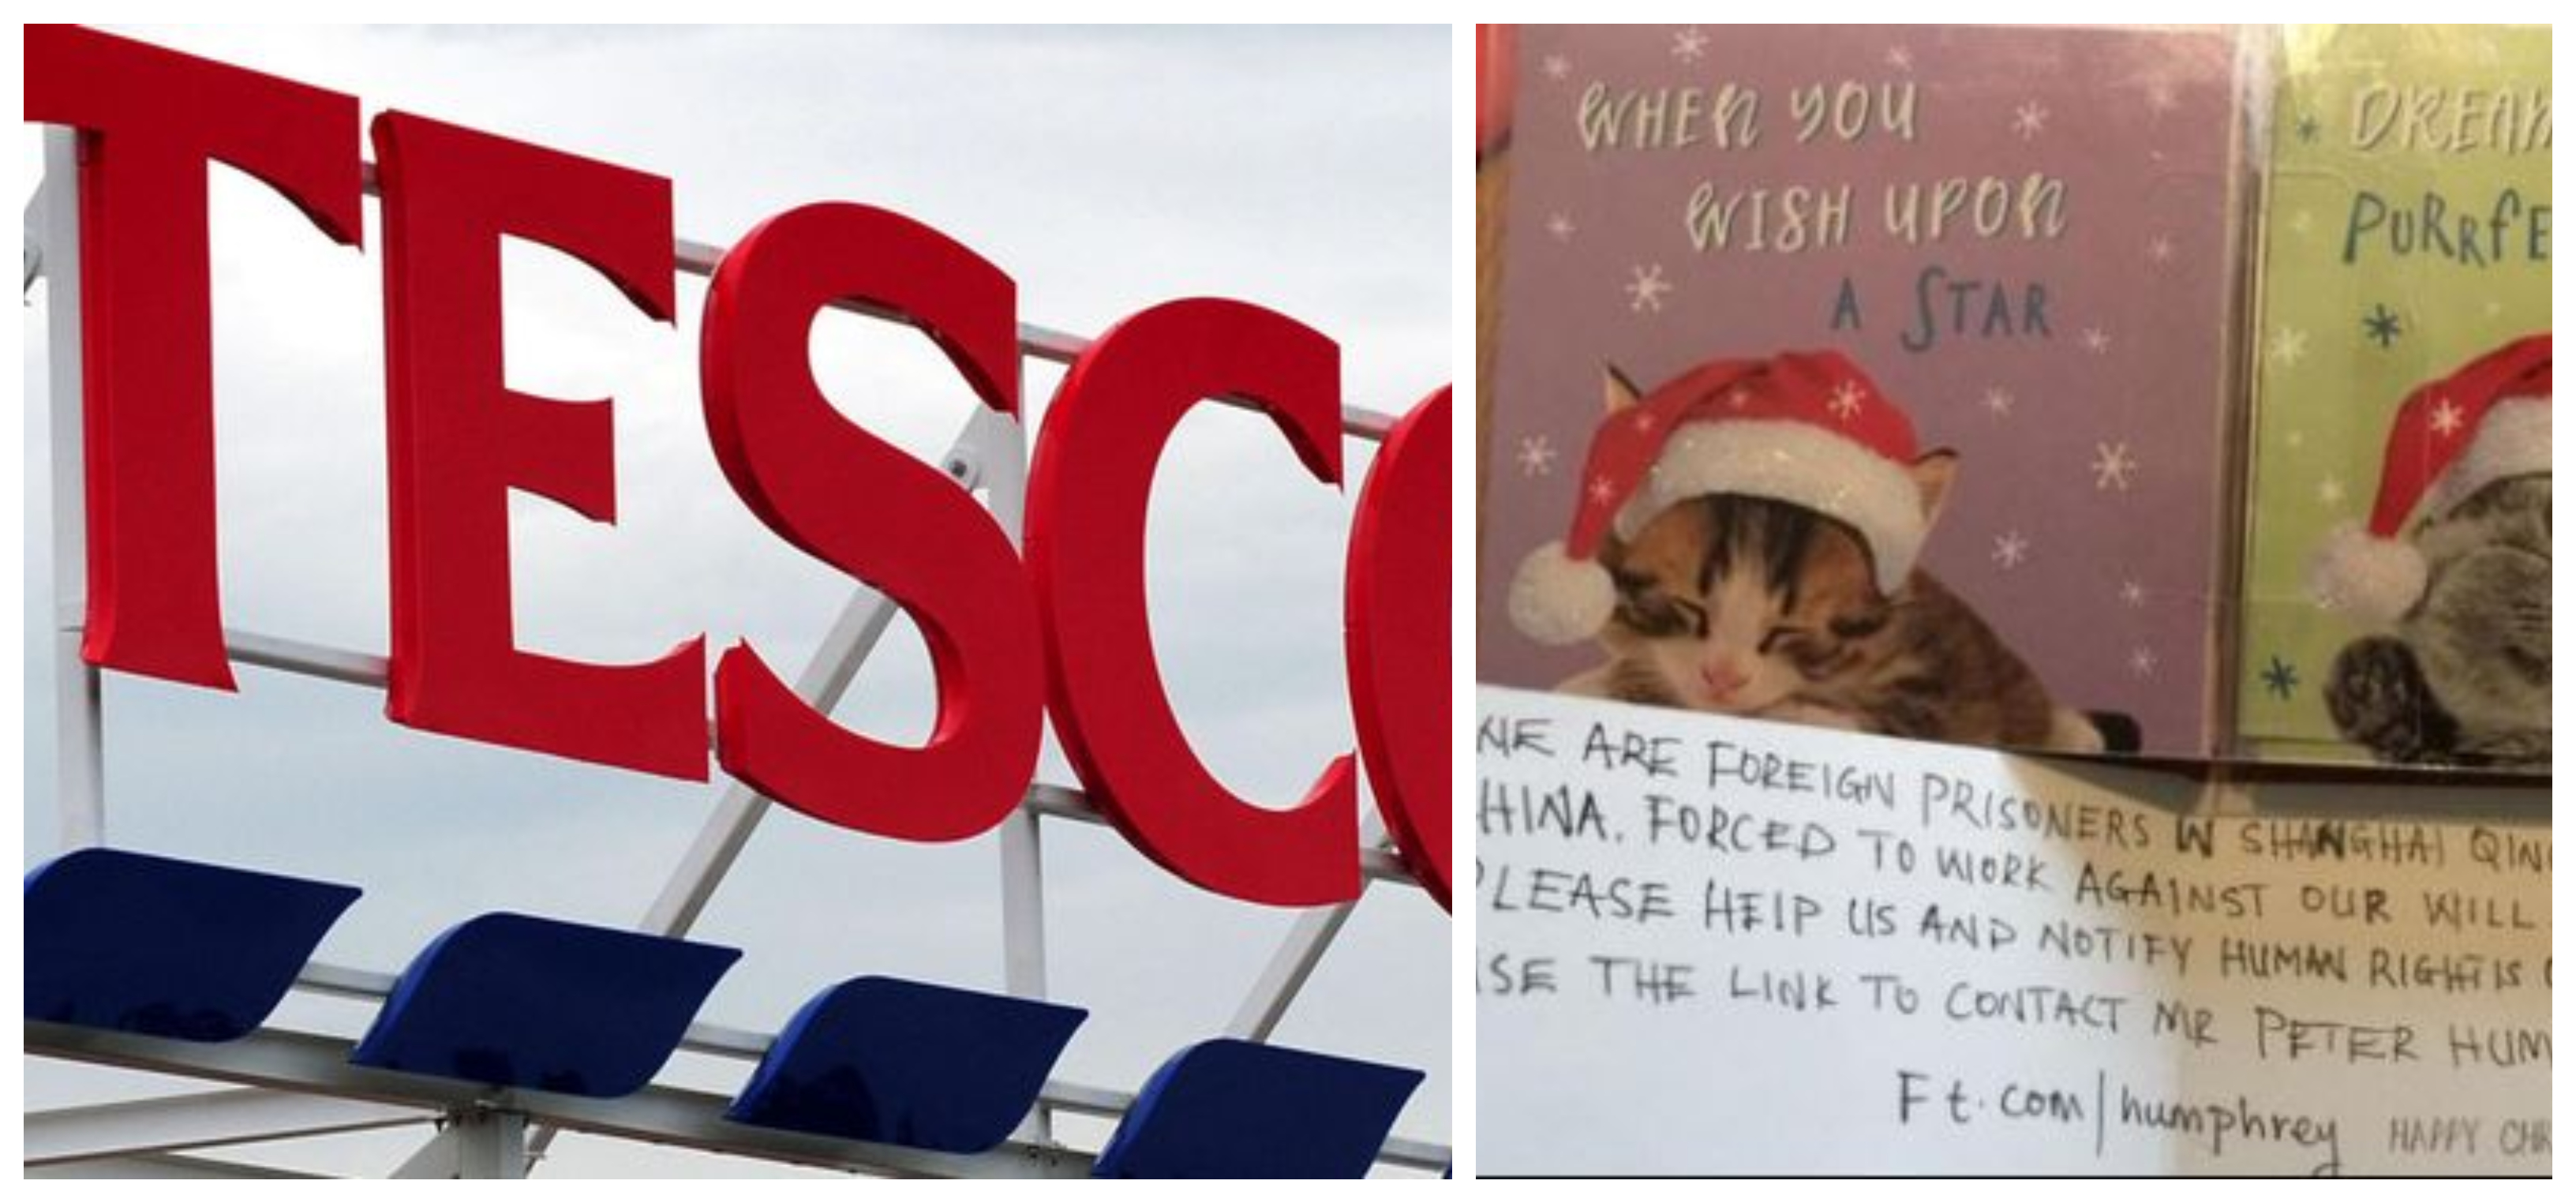 Tesco halts production at Chinese factory over alleged ‘forced’ labour’ to make Christmas cards